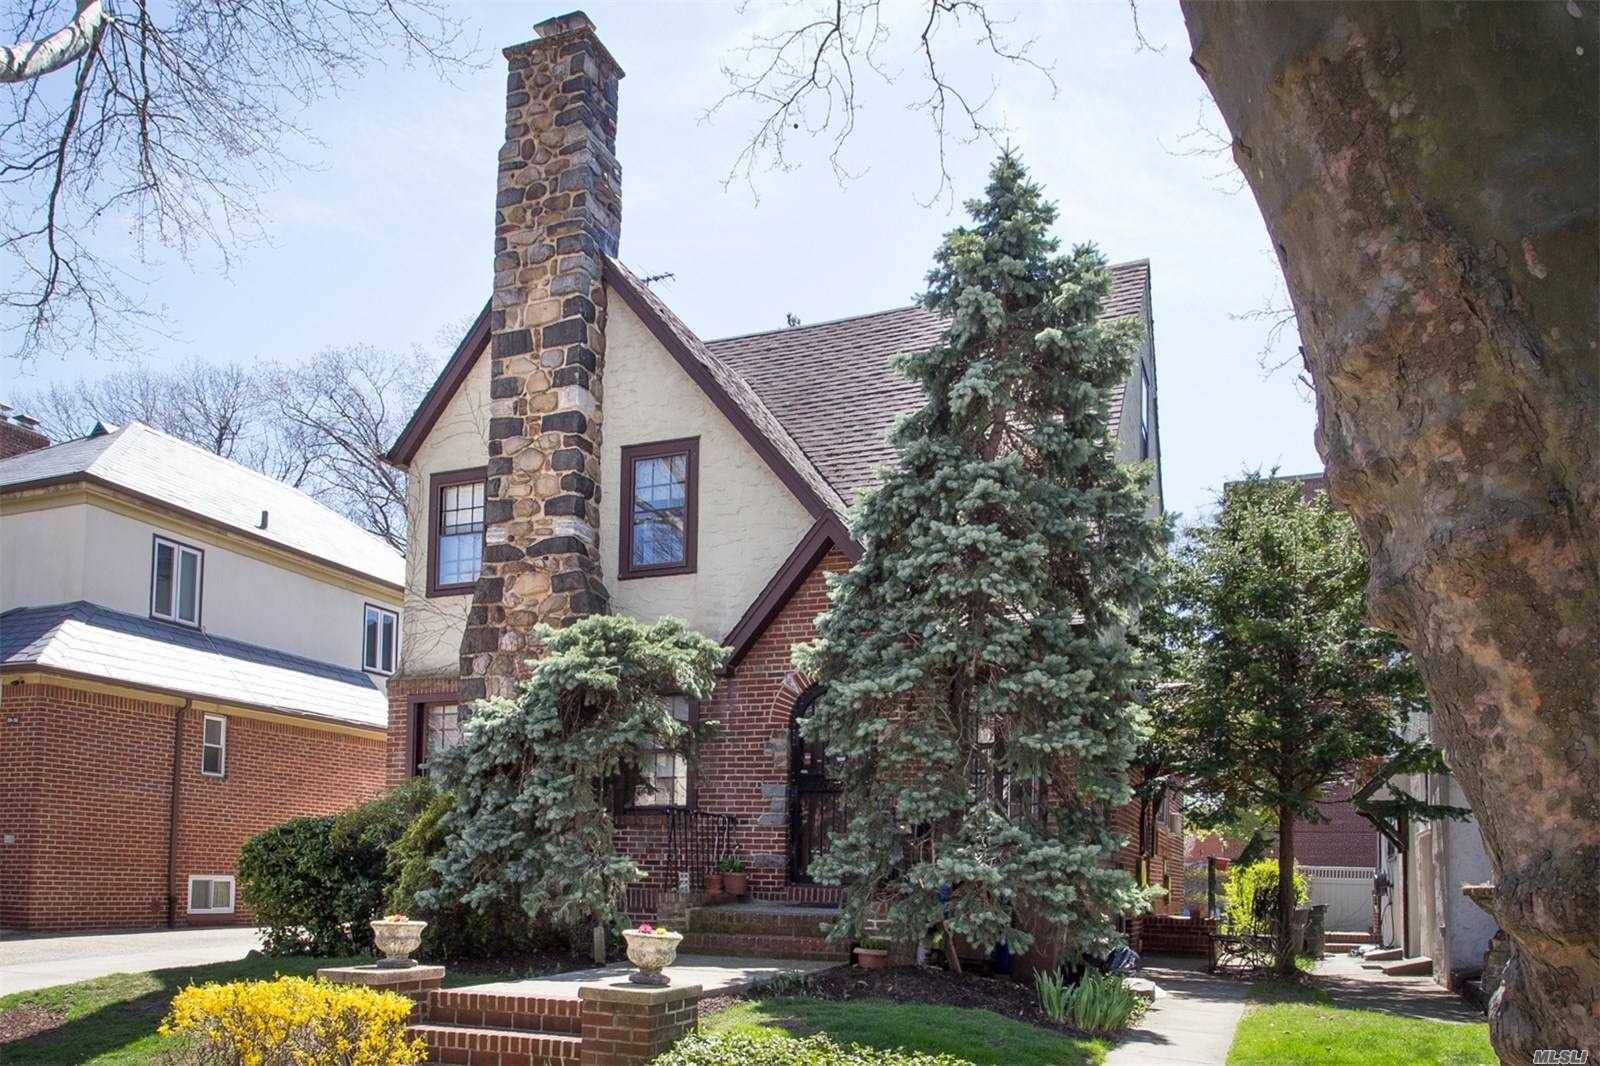 Traditional Tudor Styled Home Located In The Van Court Section Of Forest Hills.